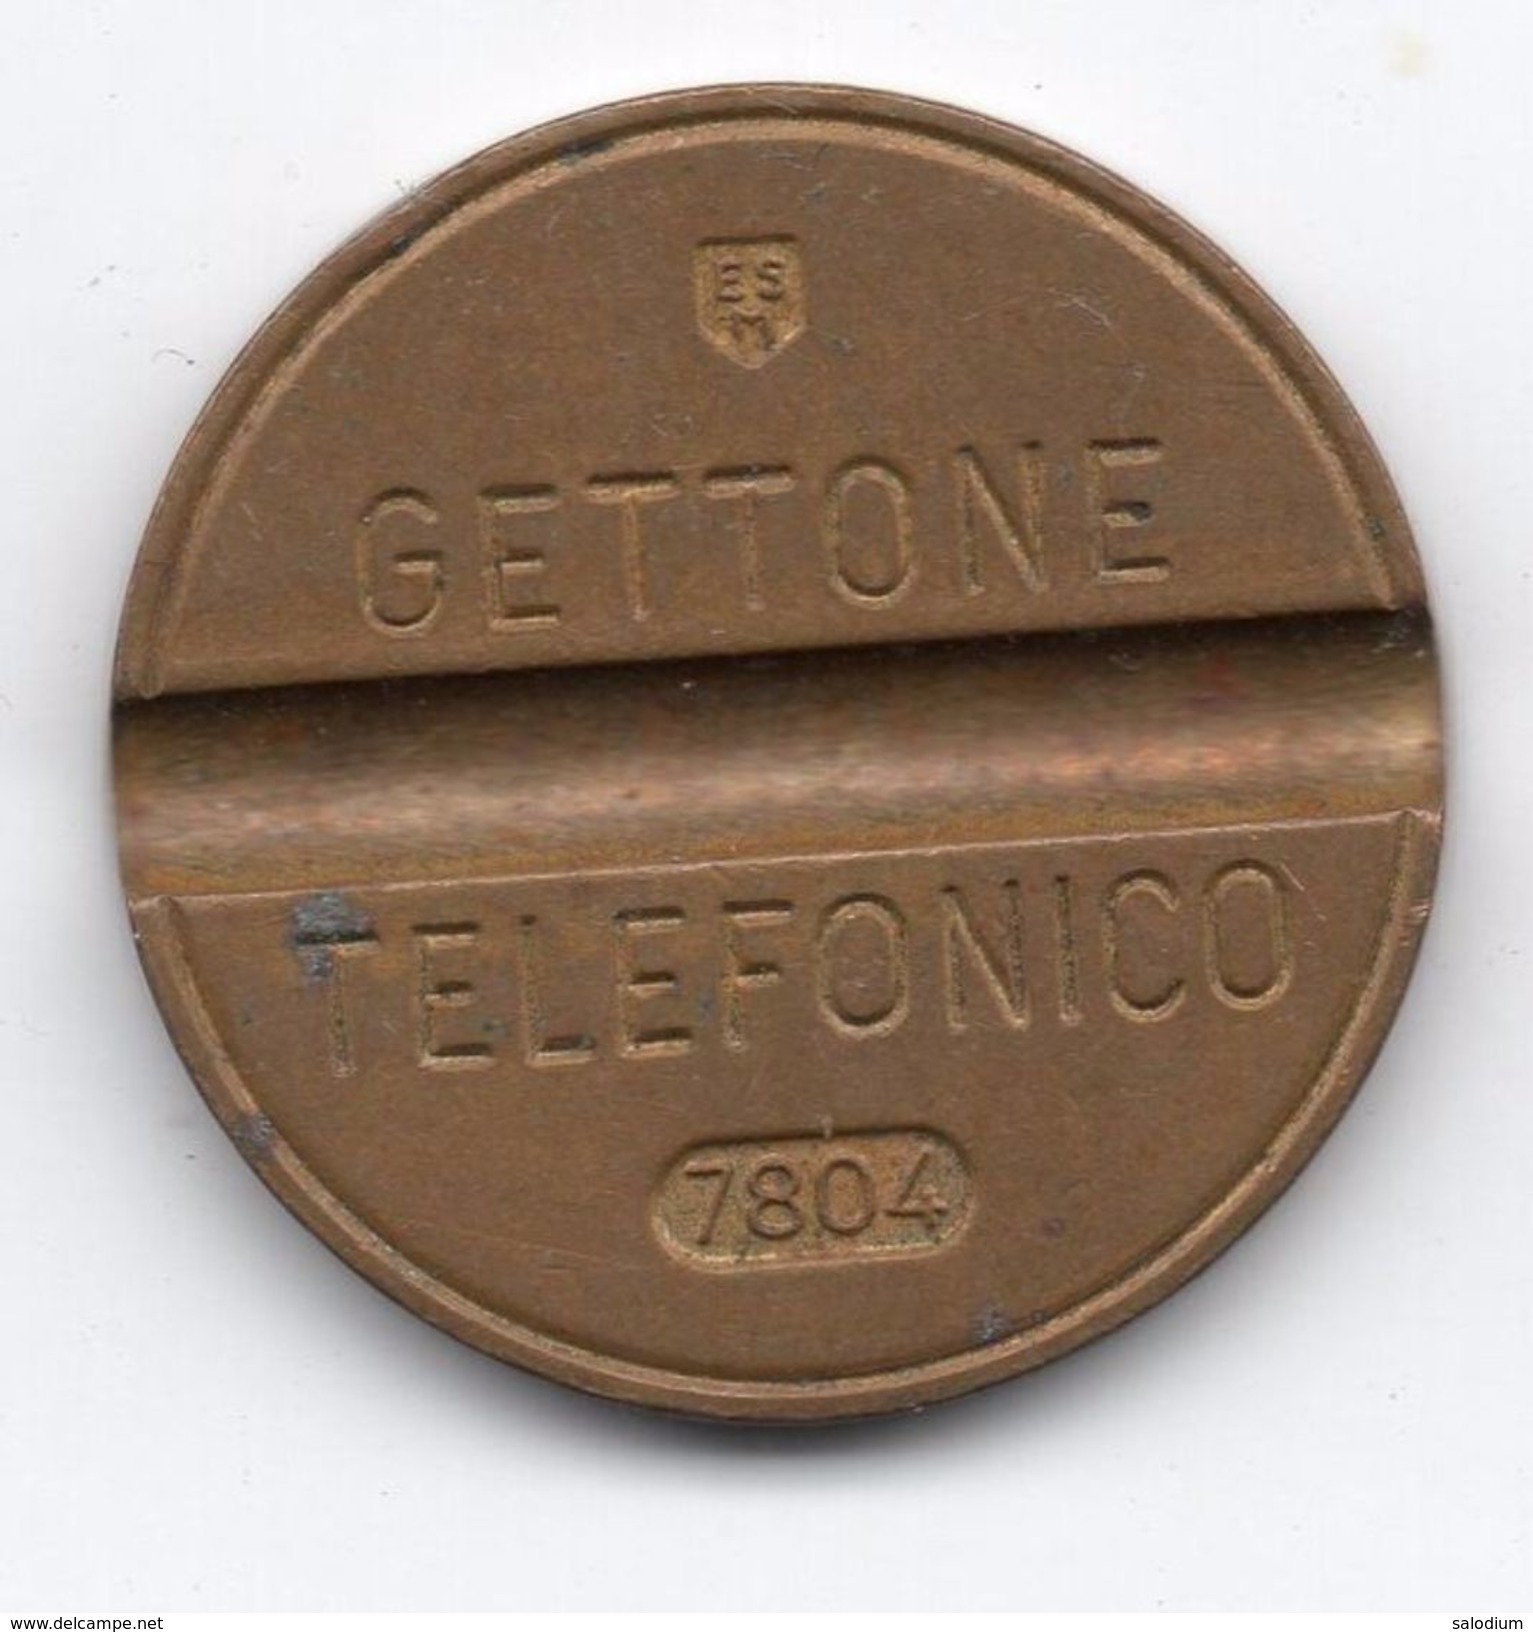 Gettone Telefonico 7804 Token Telephone - (Id-651) - Professionals/Firms